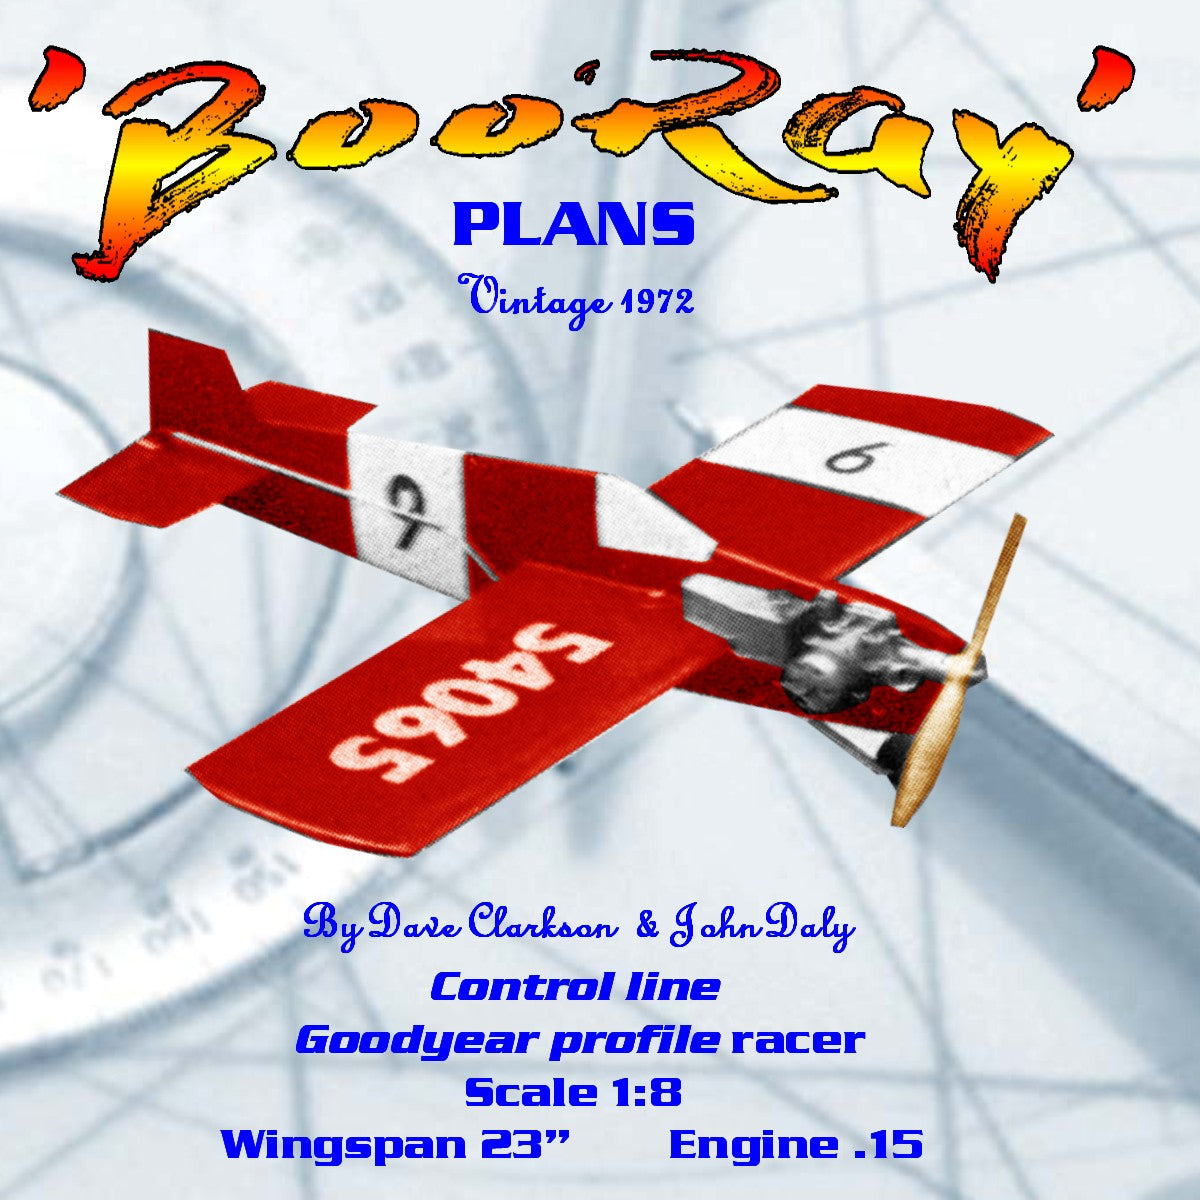 full size printed plan vintage 1972 1/8 scale profile goodyear racer 'booray' proven contest performance